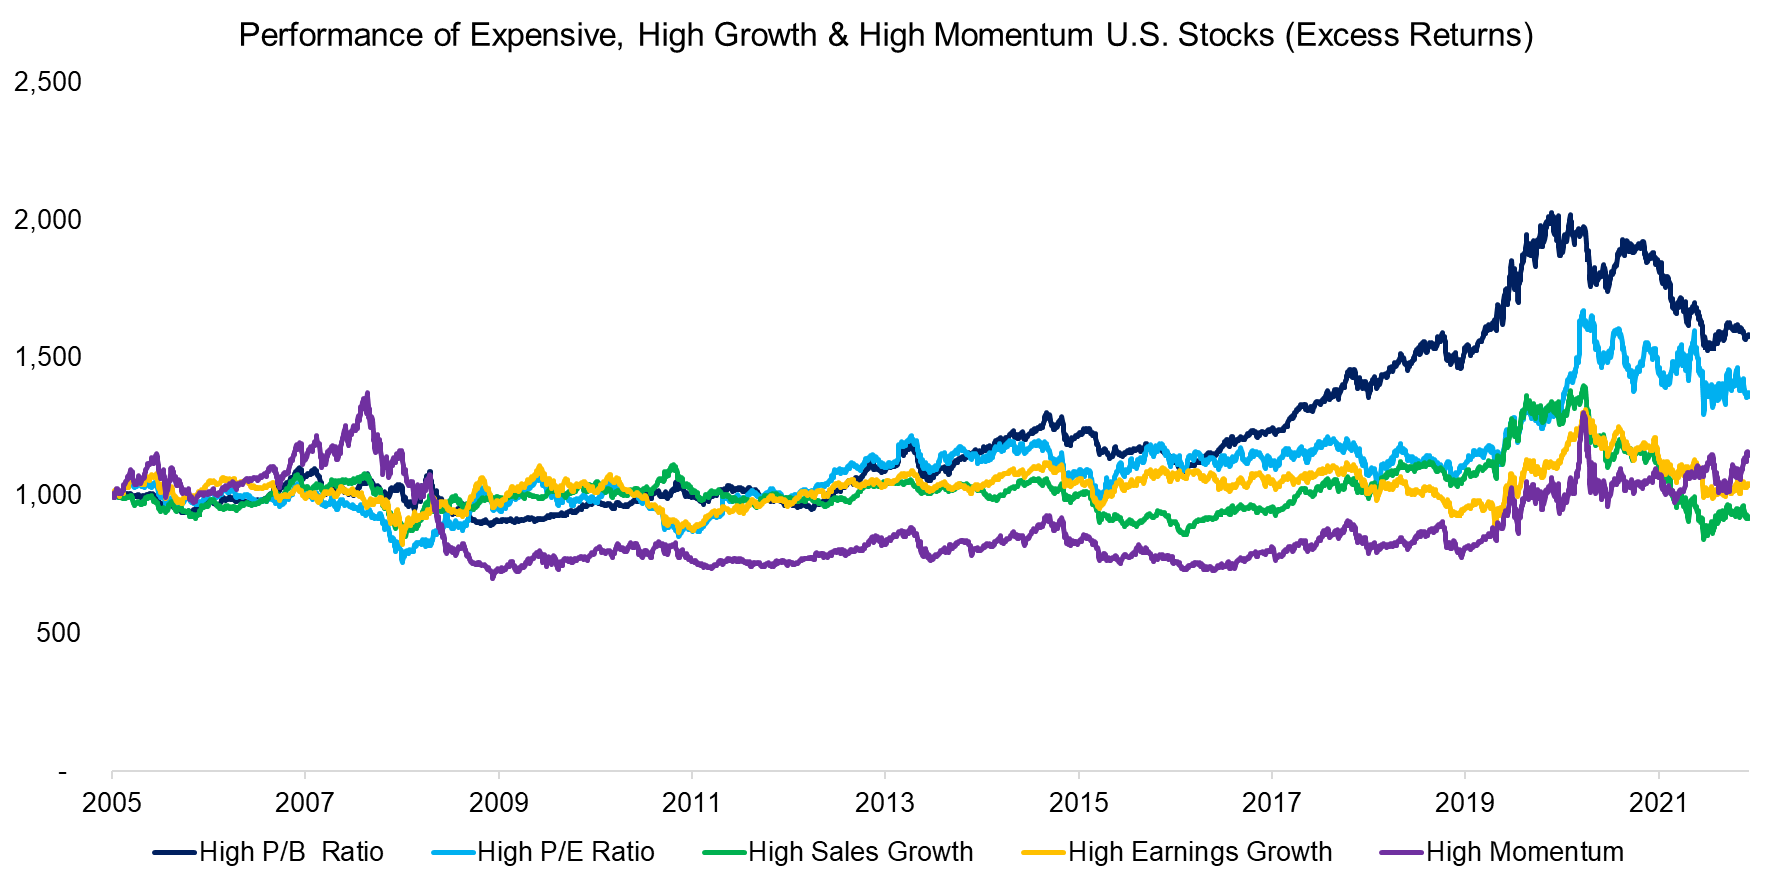 Performance of Expensive, High Growth & High Momentum U.S. Stocks (Excess Returns)